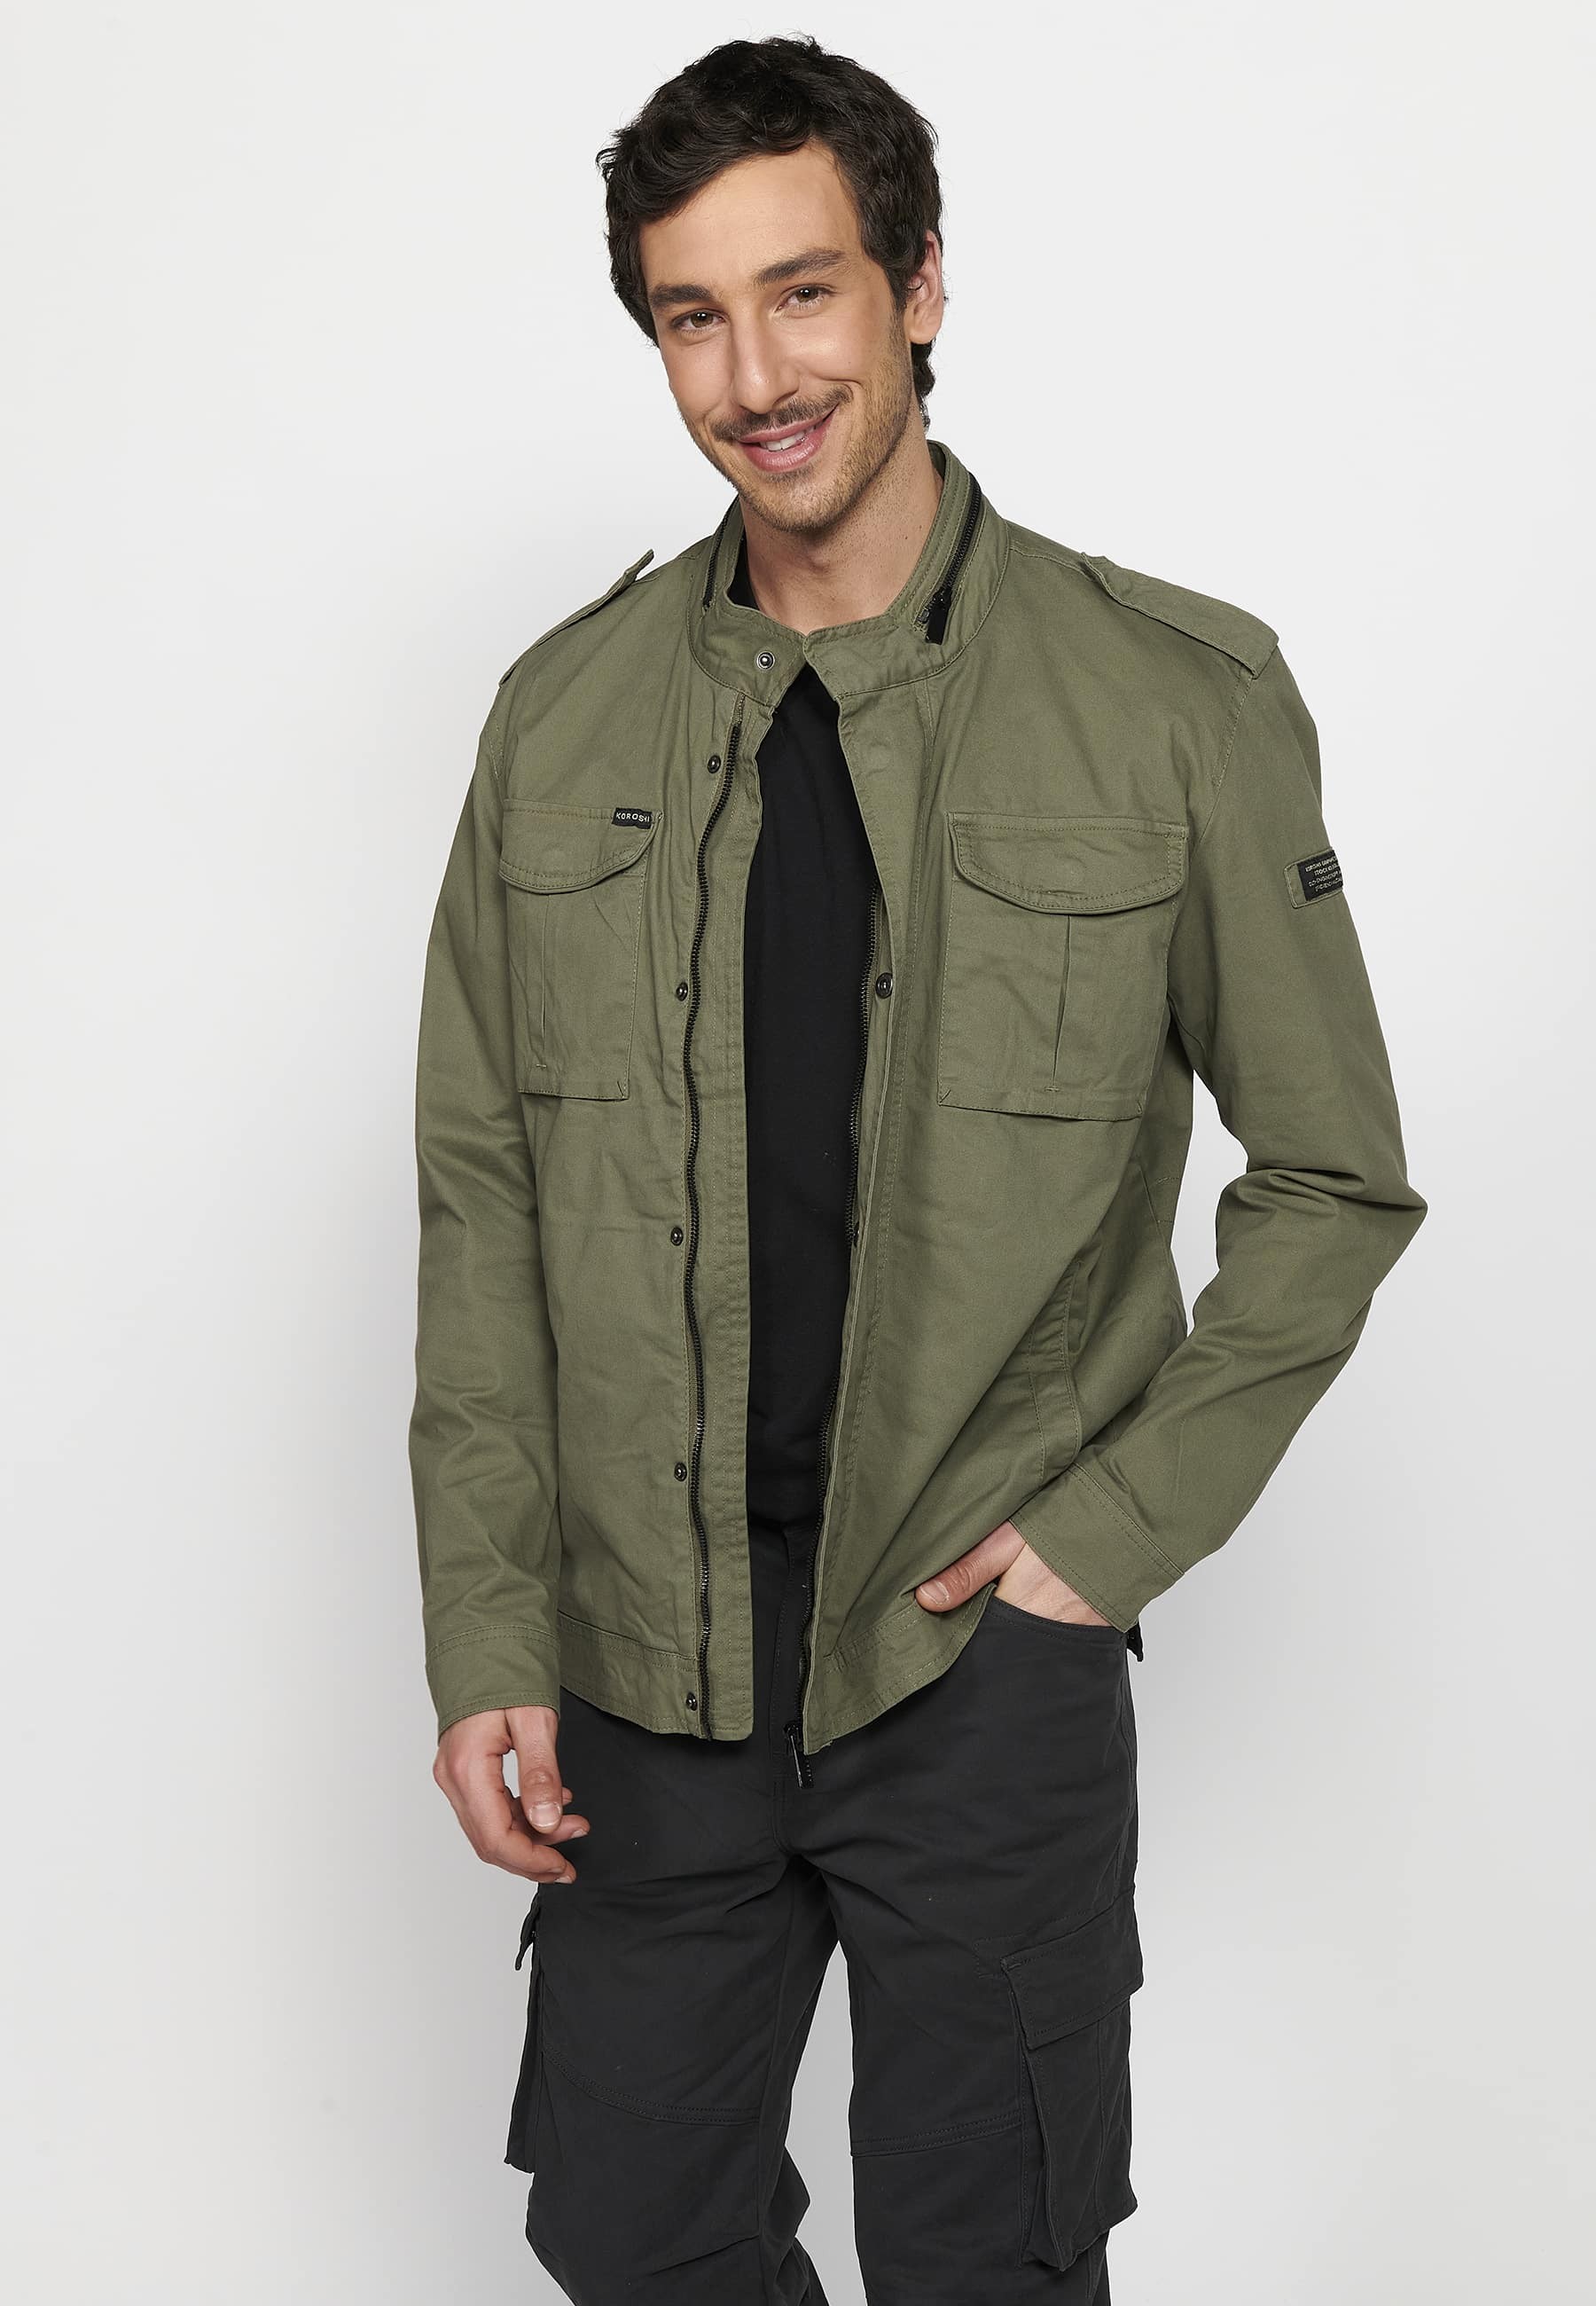 Long Sleeve Jacket with High Neck and Front Zipper Closure with Green Pockets for Men